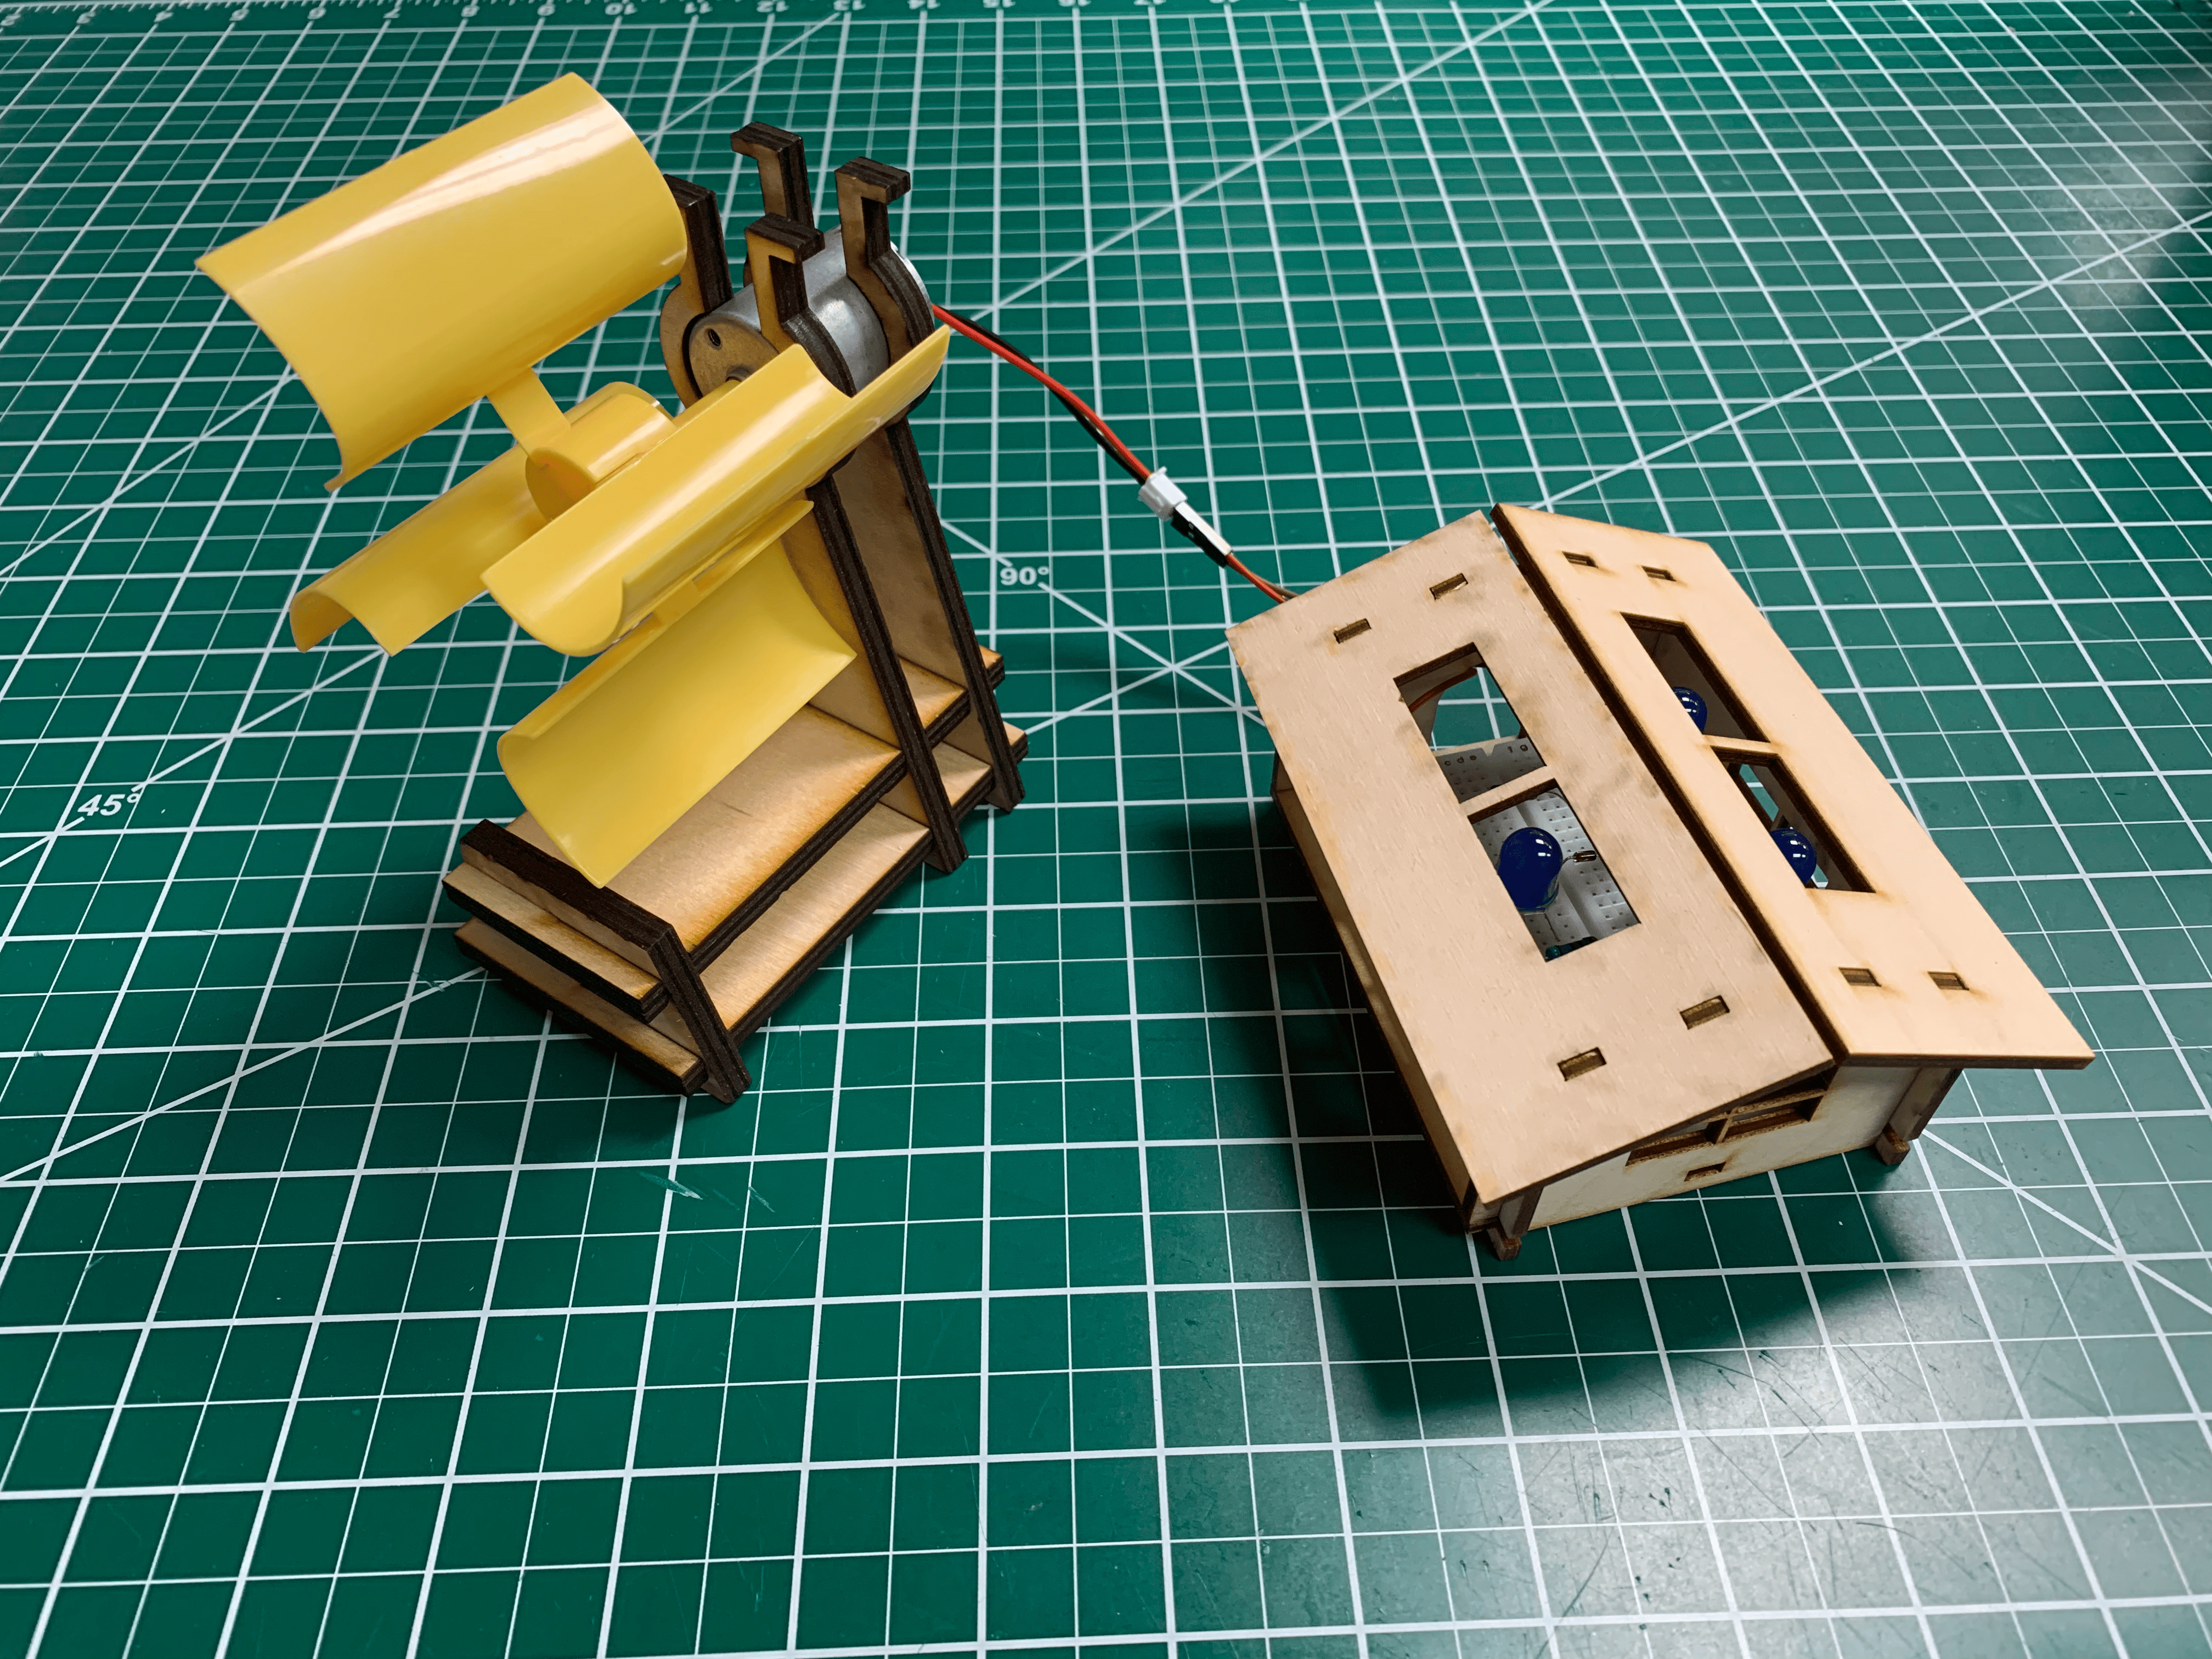 working wood and plastic wind turbine model with breadboard and LEDs in house-shaped wood enclosure